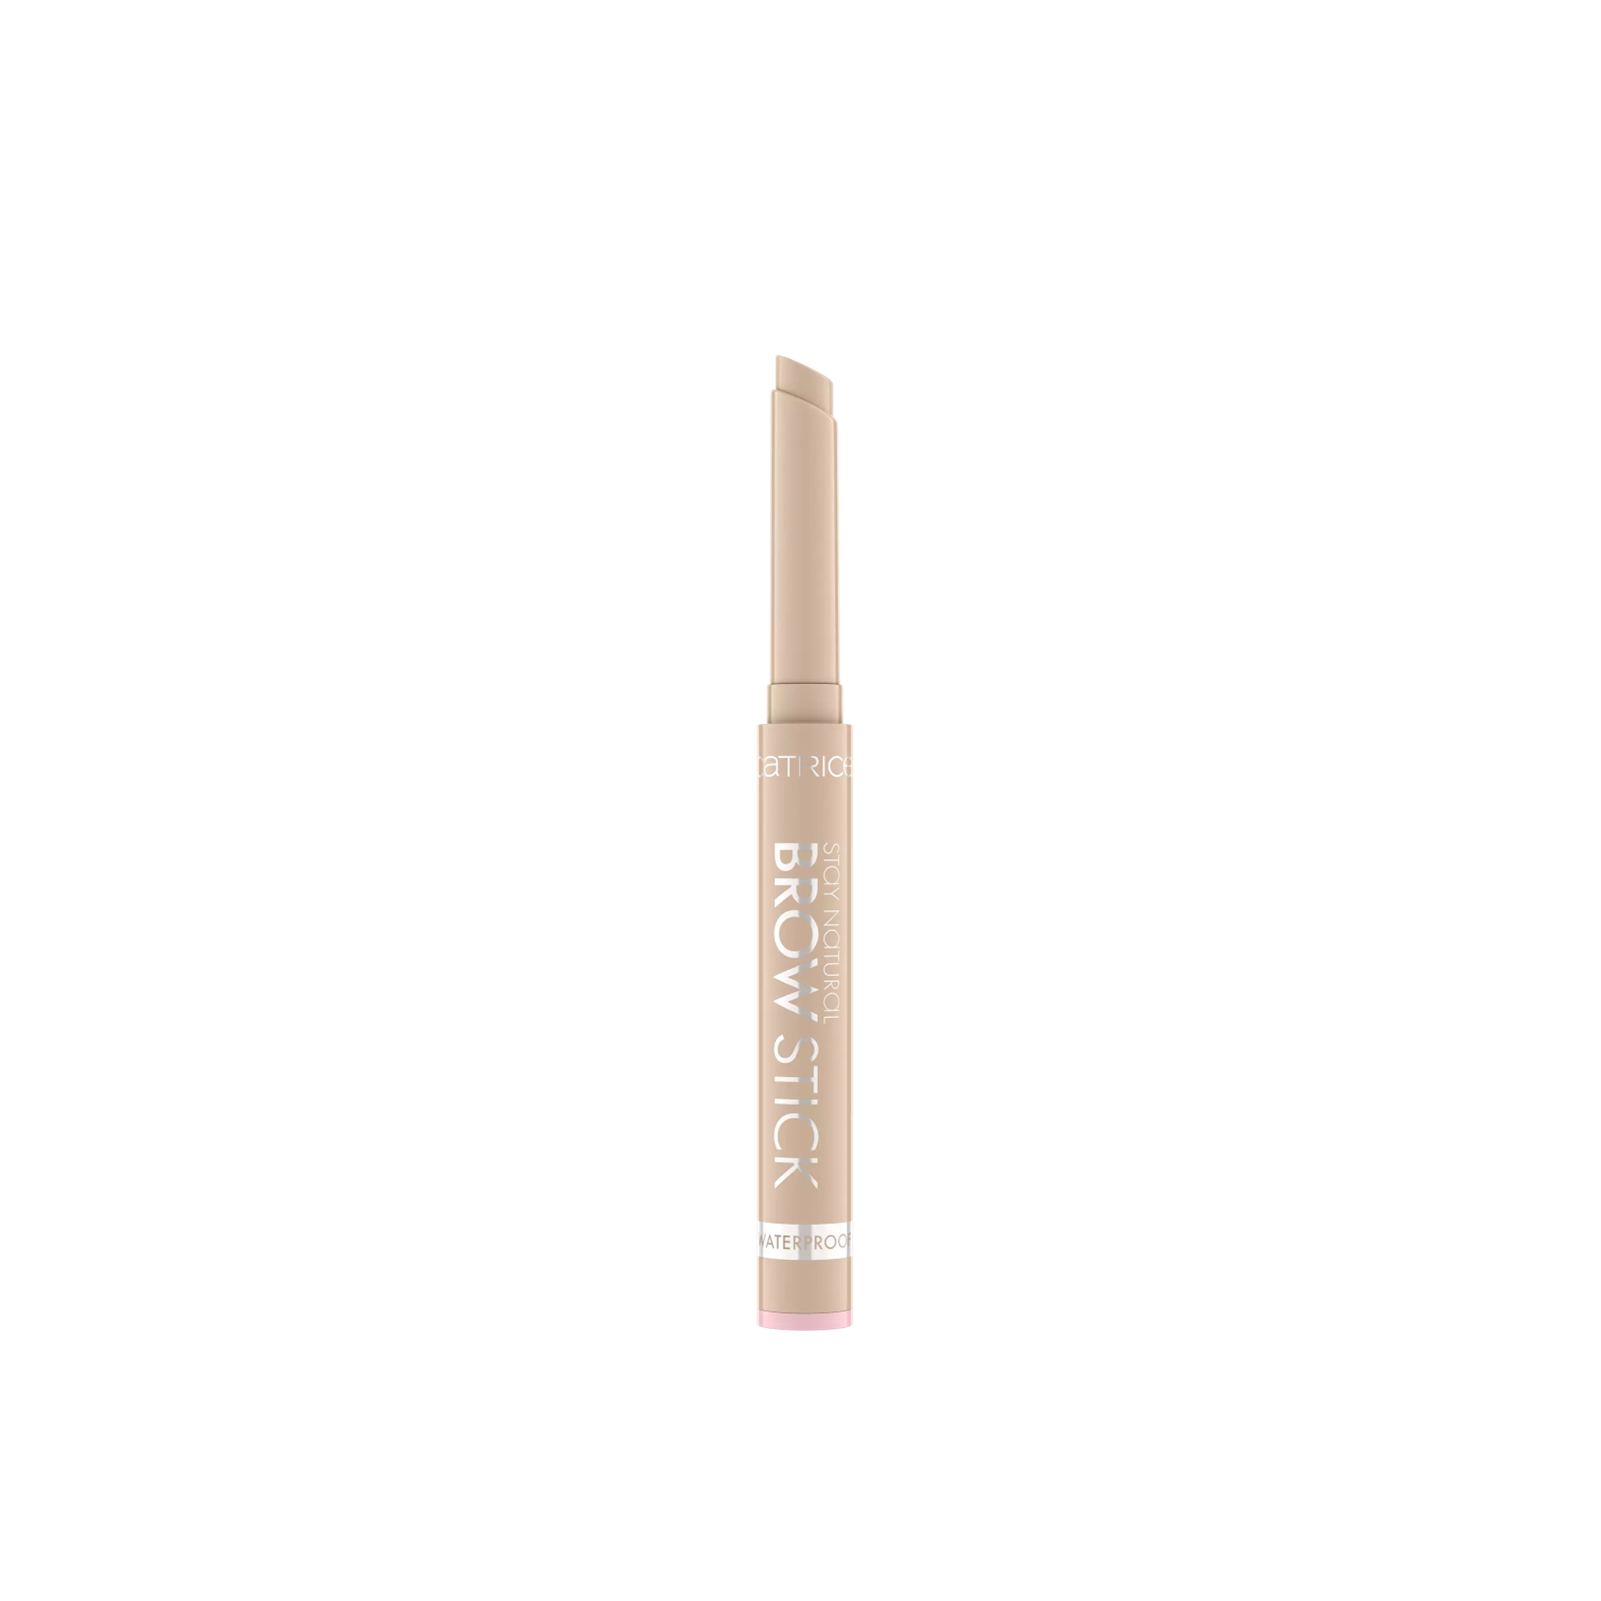 Buy Catrice Stay Natural Waterproof Brow Stick 010 Soft Blonde 1g (0.03 oz)  · USA